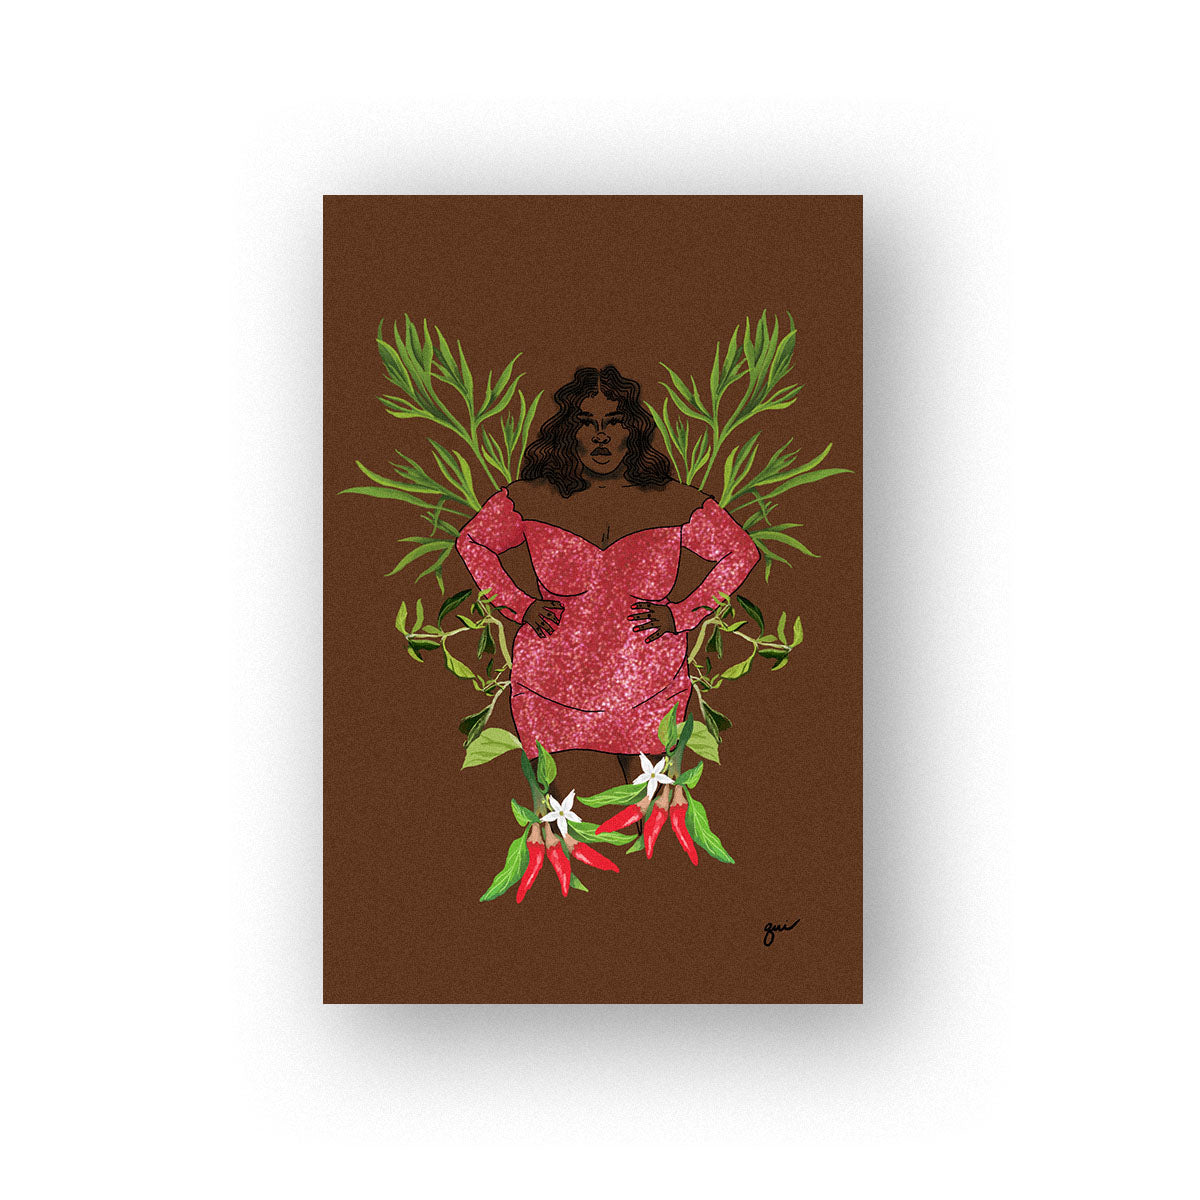 dark brown dreamgirl art print with an illustration of a woman wearing a pink dress and her arms on her hips in front of a botanical design